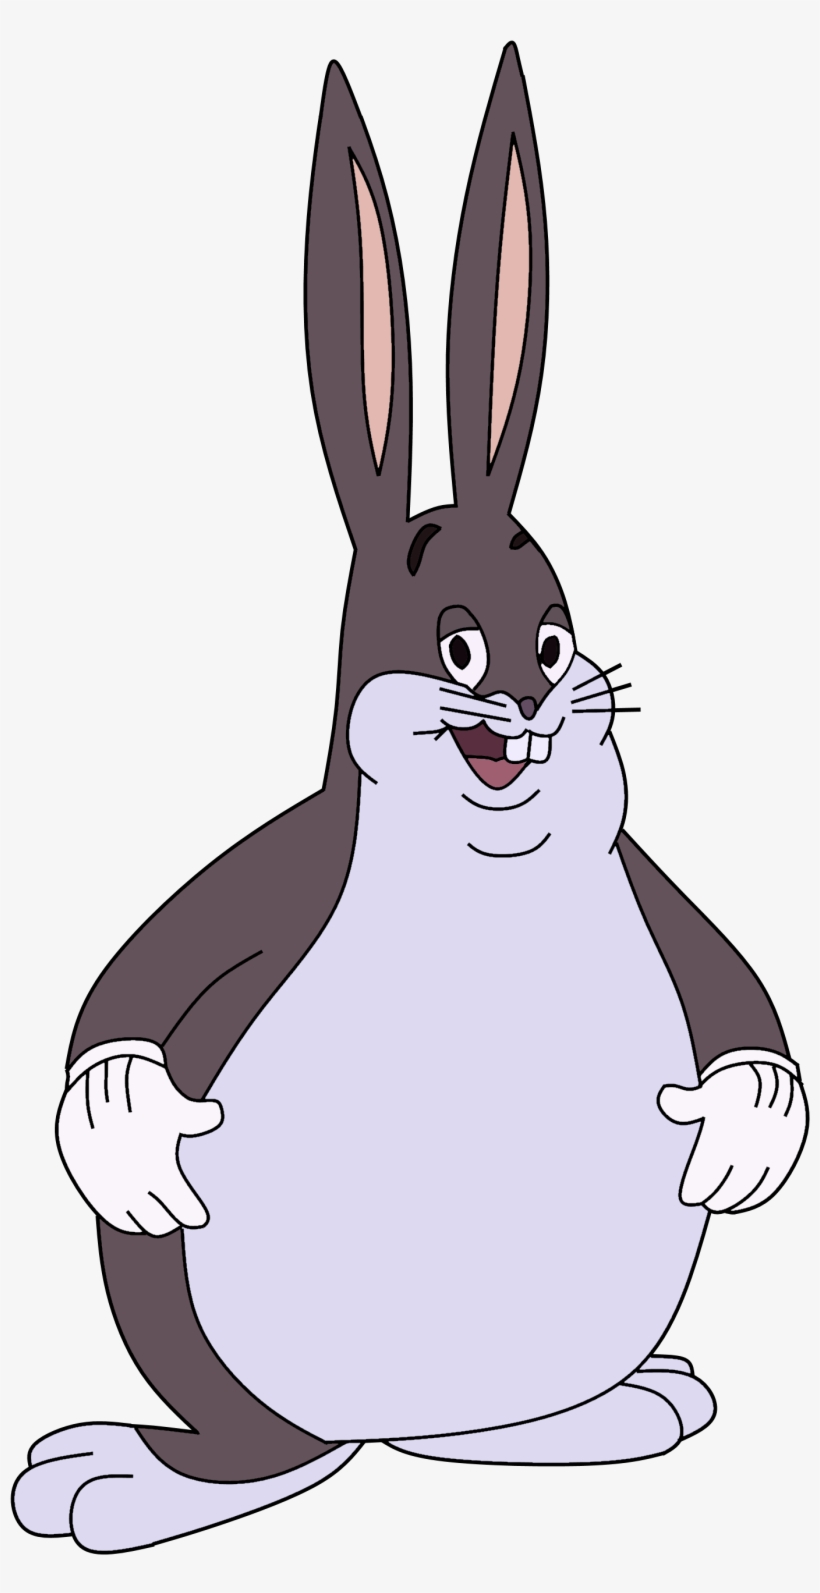 Use It Wisely - Big Chungus Meme, transparent png #8670046